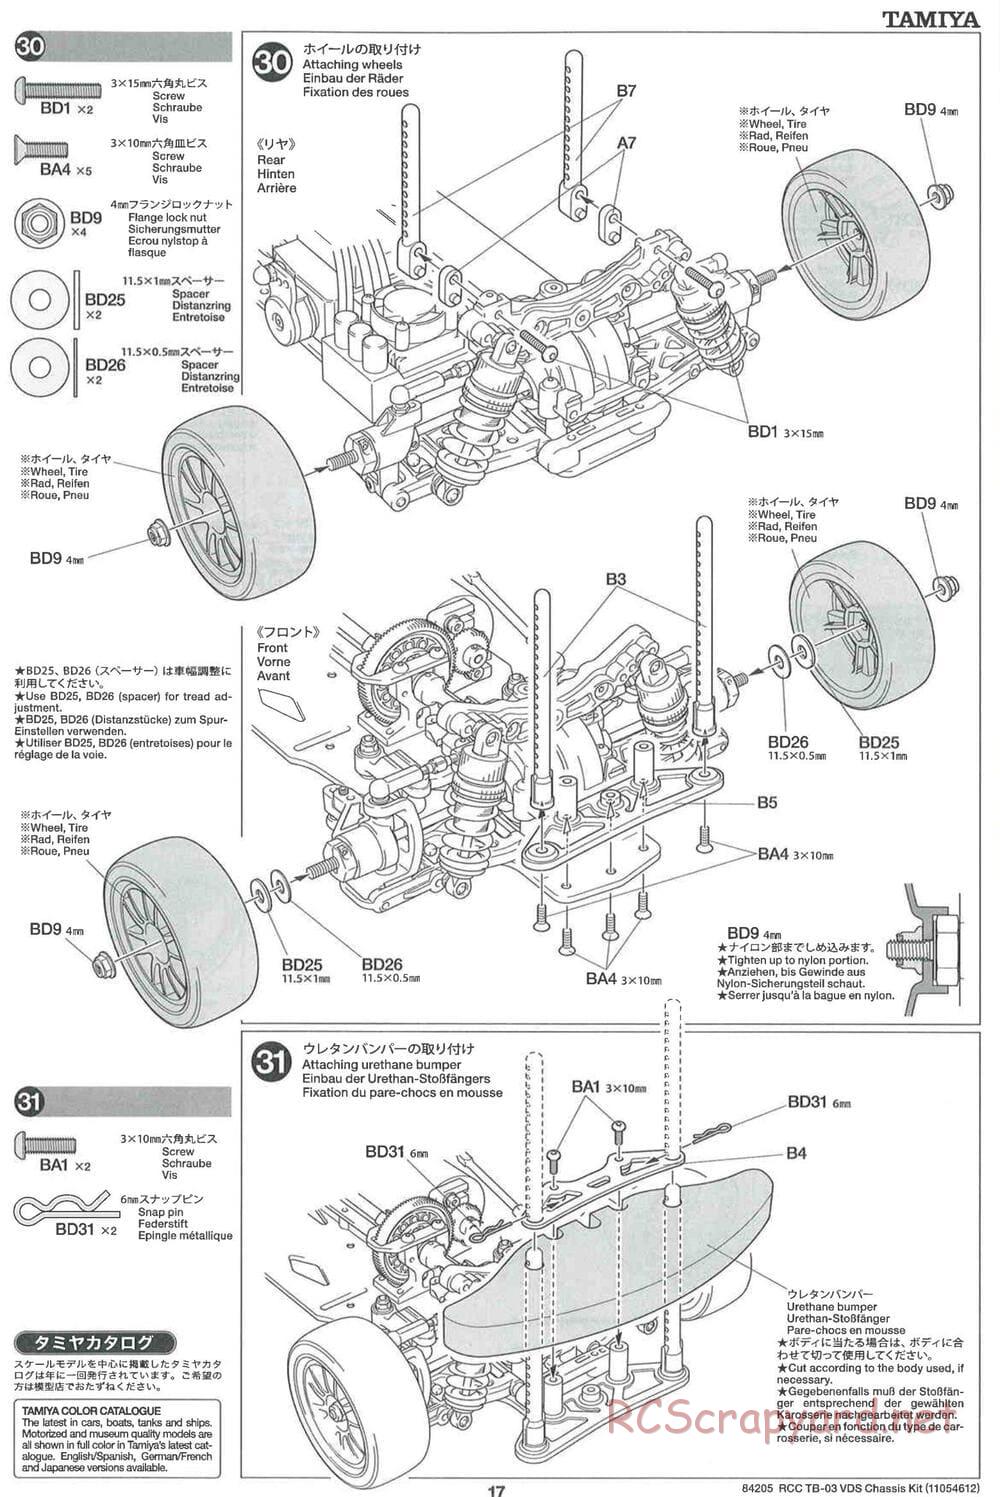 Tamiya - TB-03 VDS Drift Spec Chassis - Manual - Page 17